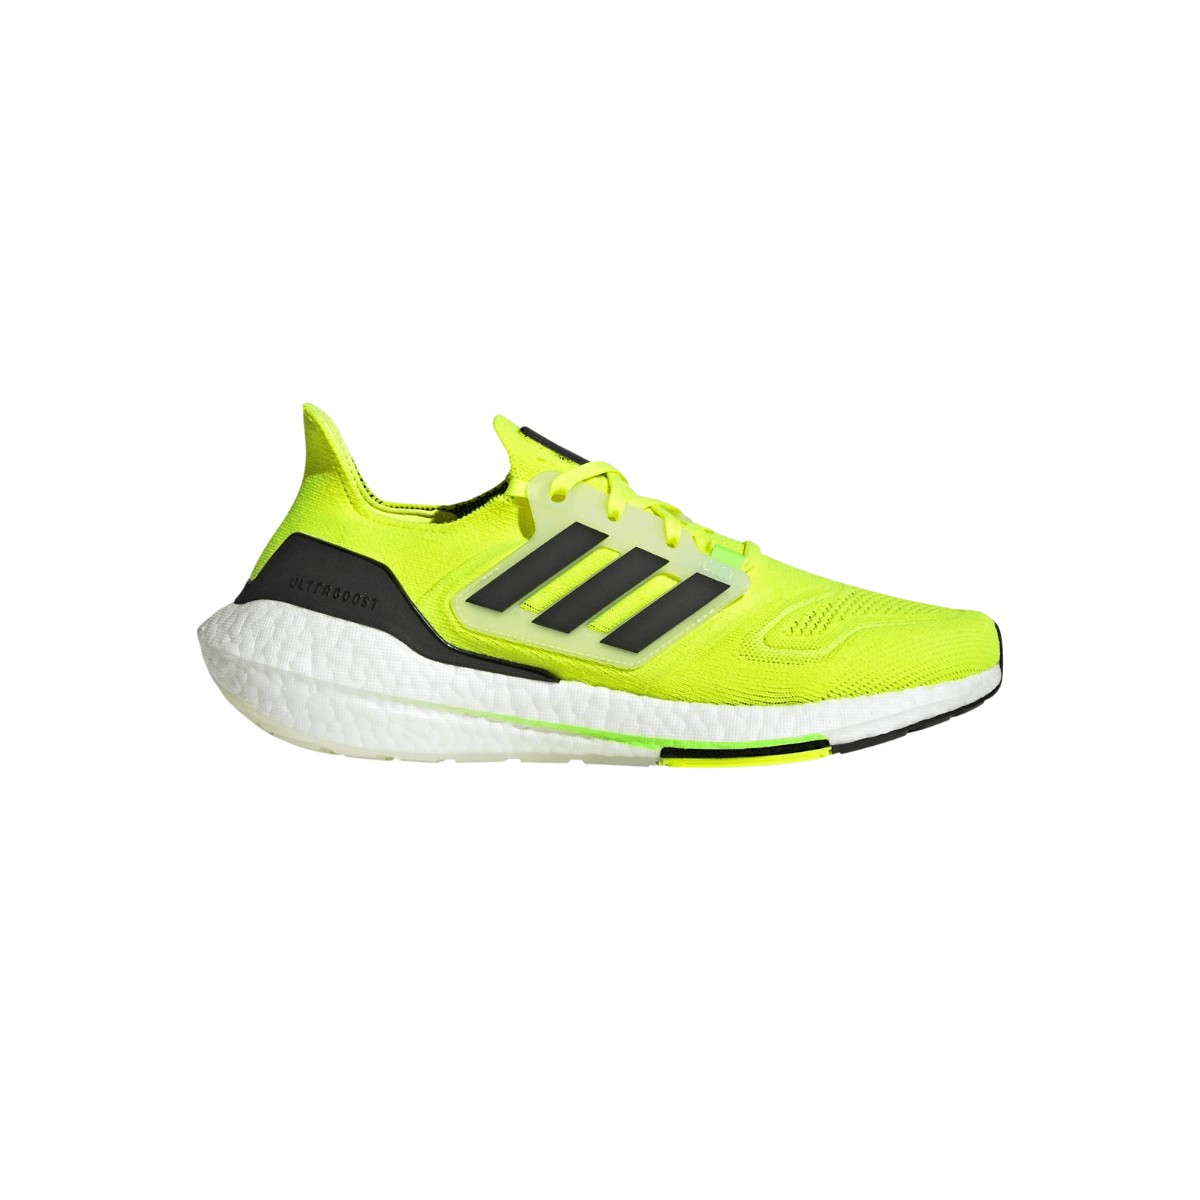 Infantil arco trompeta Buy Adidas Men's Ultraboost 22 Shoes At The Best Price